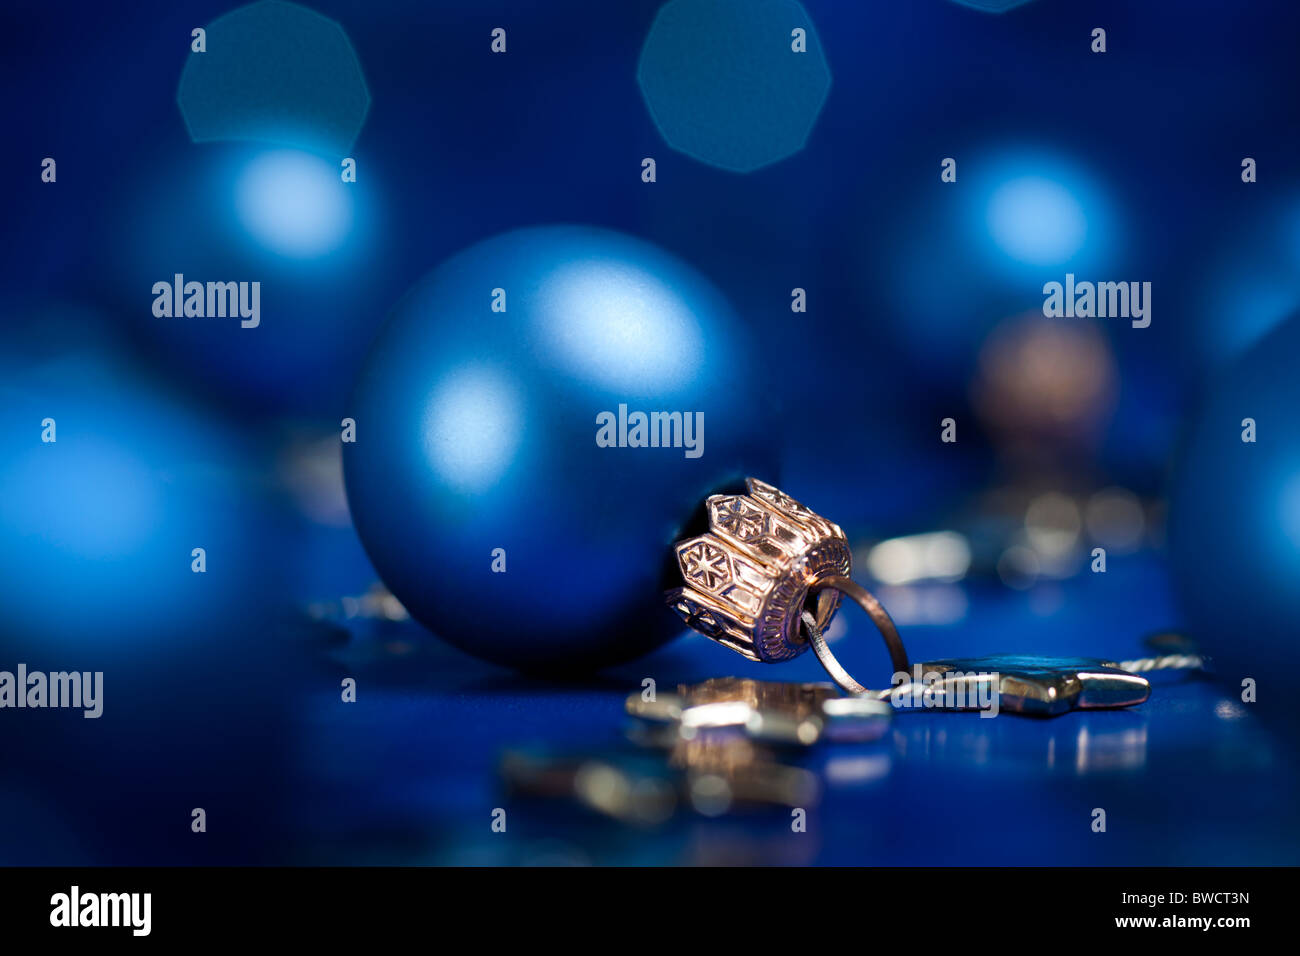 Christmas decoration with bauble. Selective focus on ball. aRGB. Stock Photo